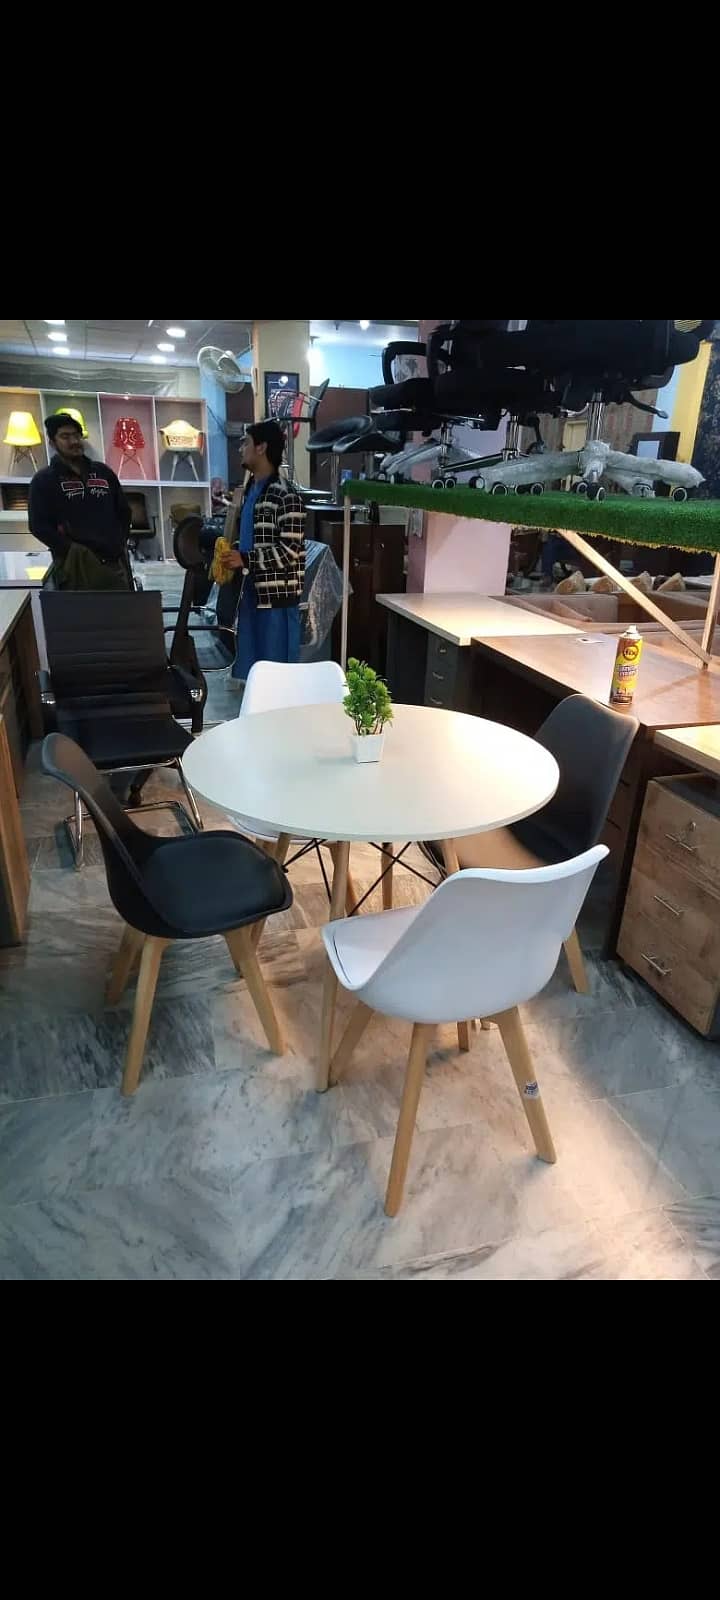 CAFE'S RESTAURANT LIVING ROOM FURNITURE AVAILABLE FOR SALE 2